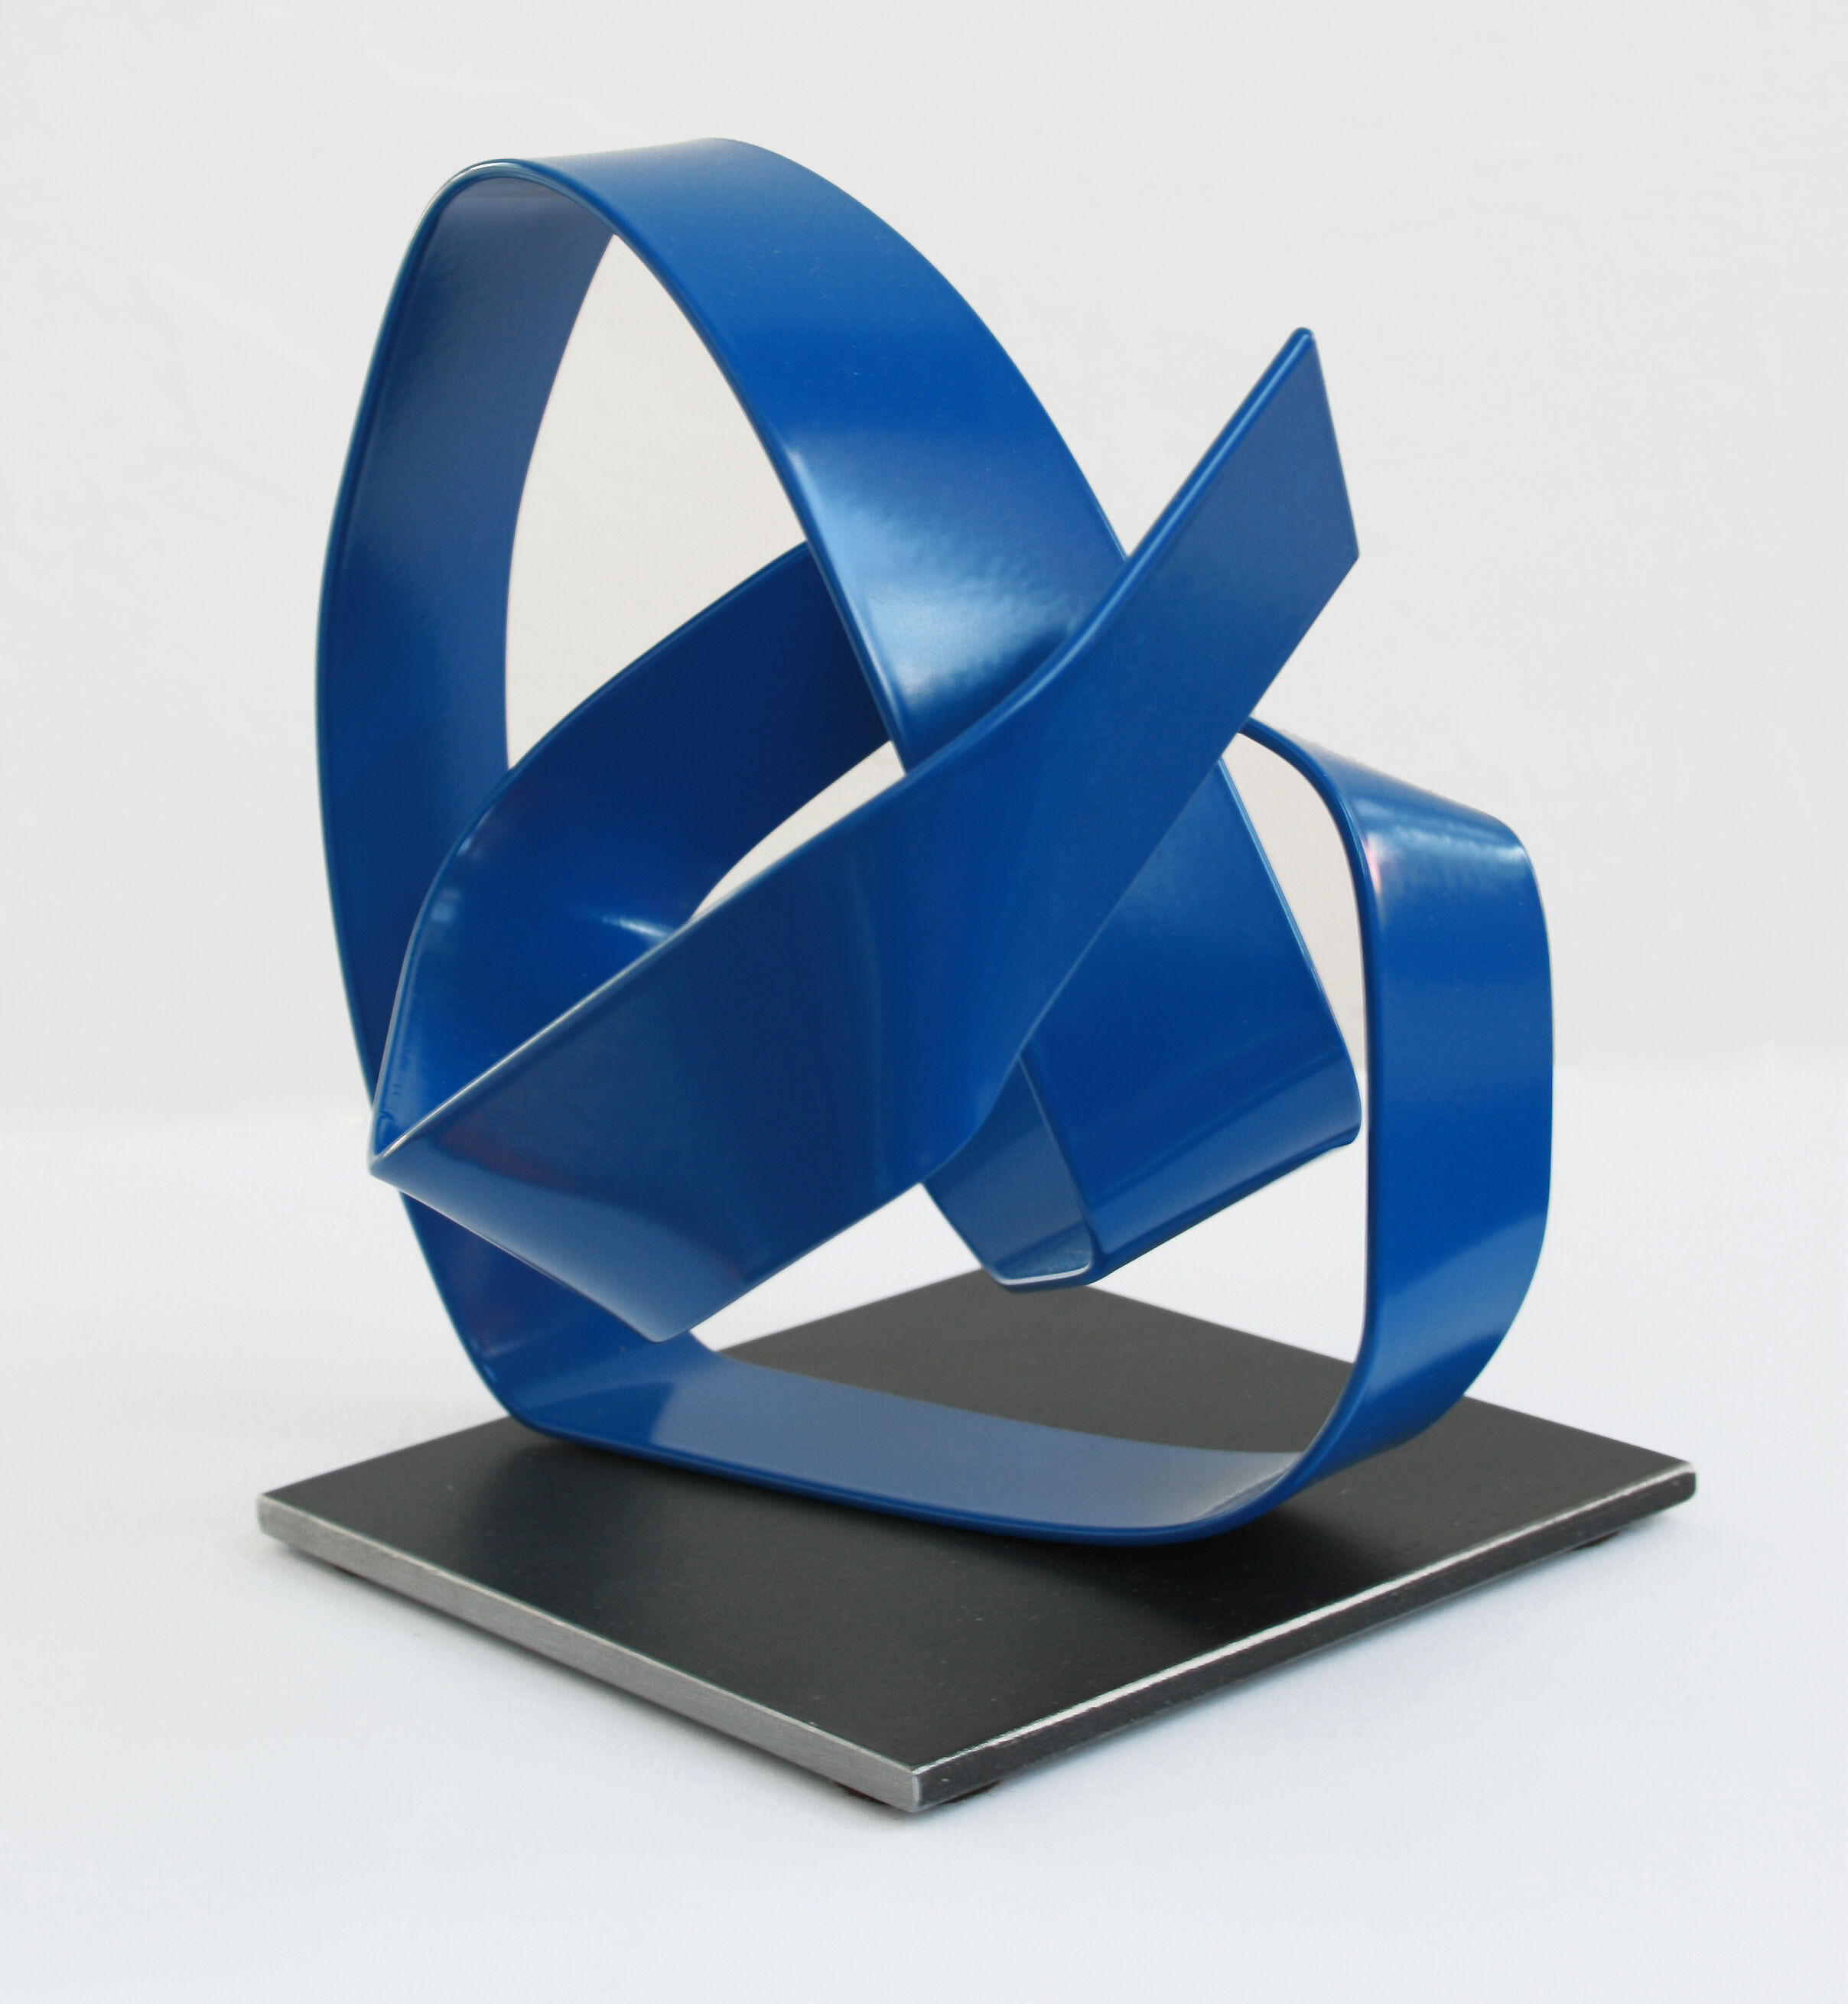 Sculpture "from the series small enthusiasts (blue II)" (2022)